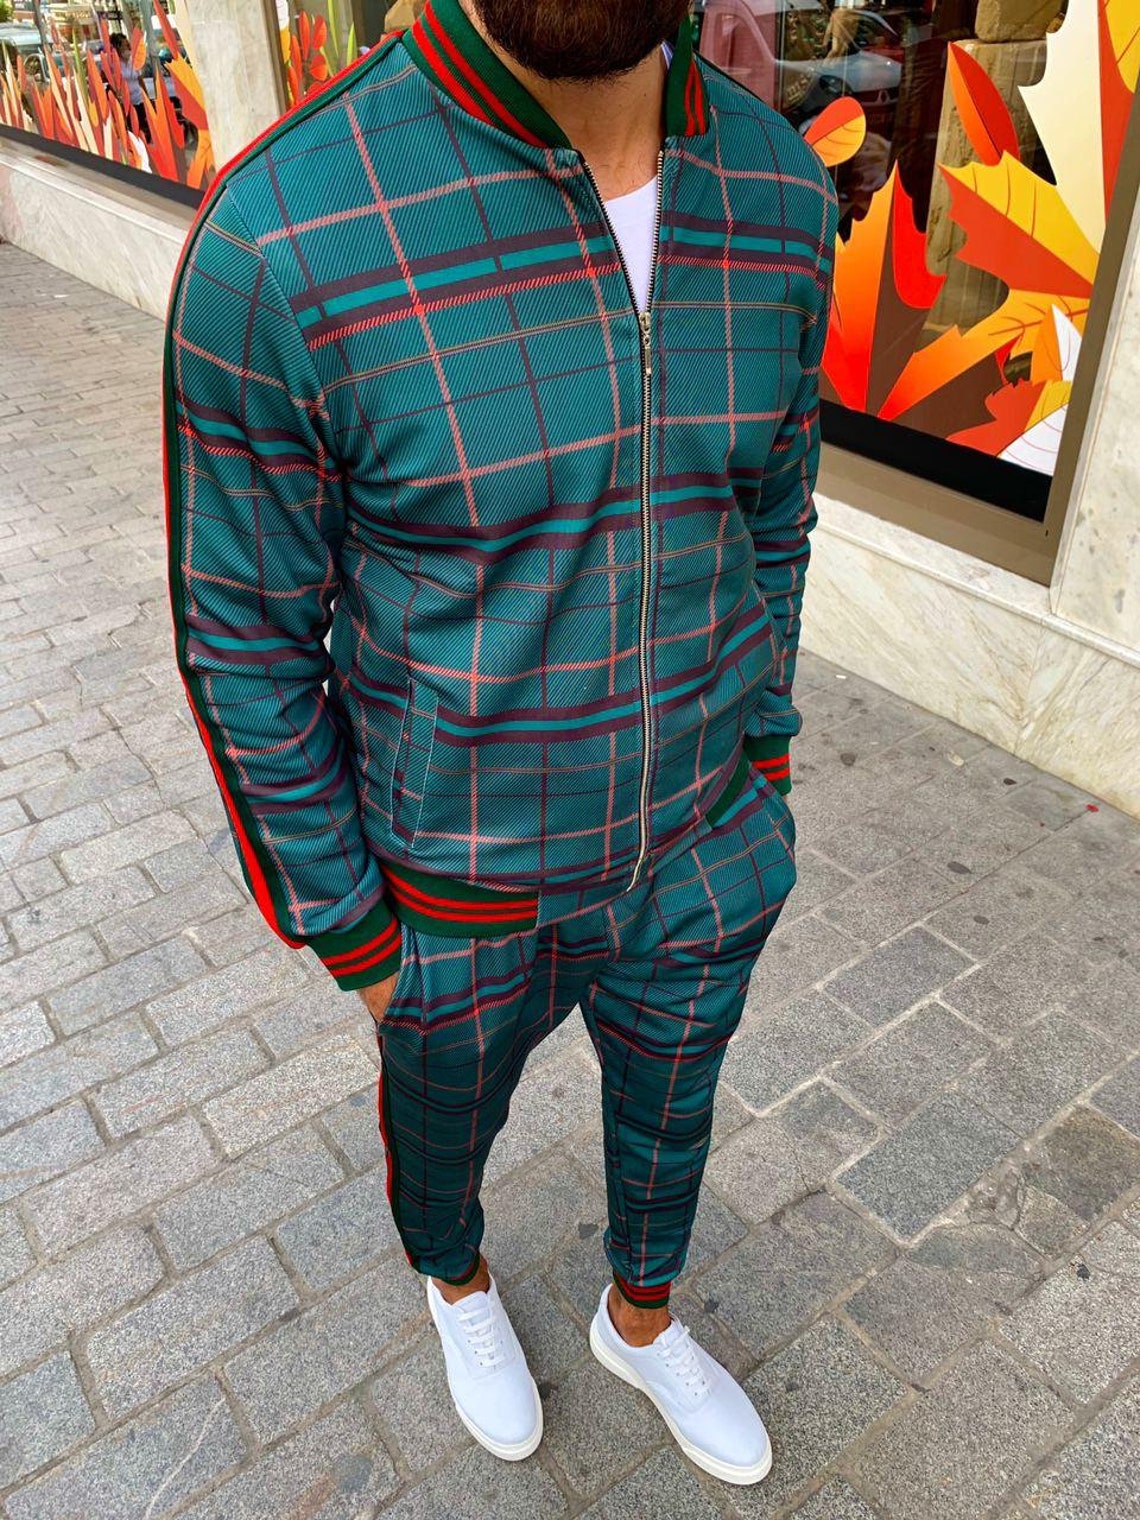 Gentlemen Unisex Green Red Striped Checked Plaid Tracksuit | Etsy